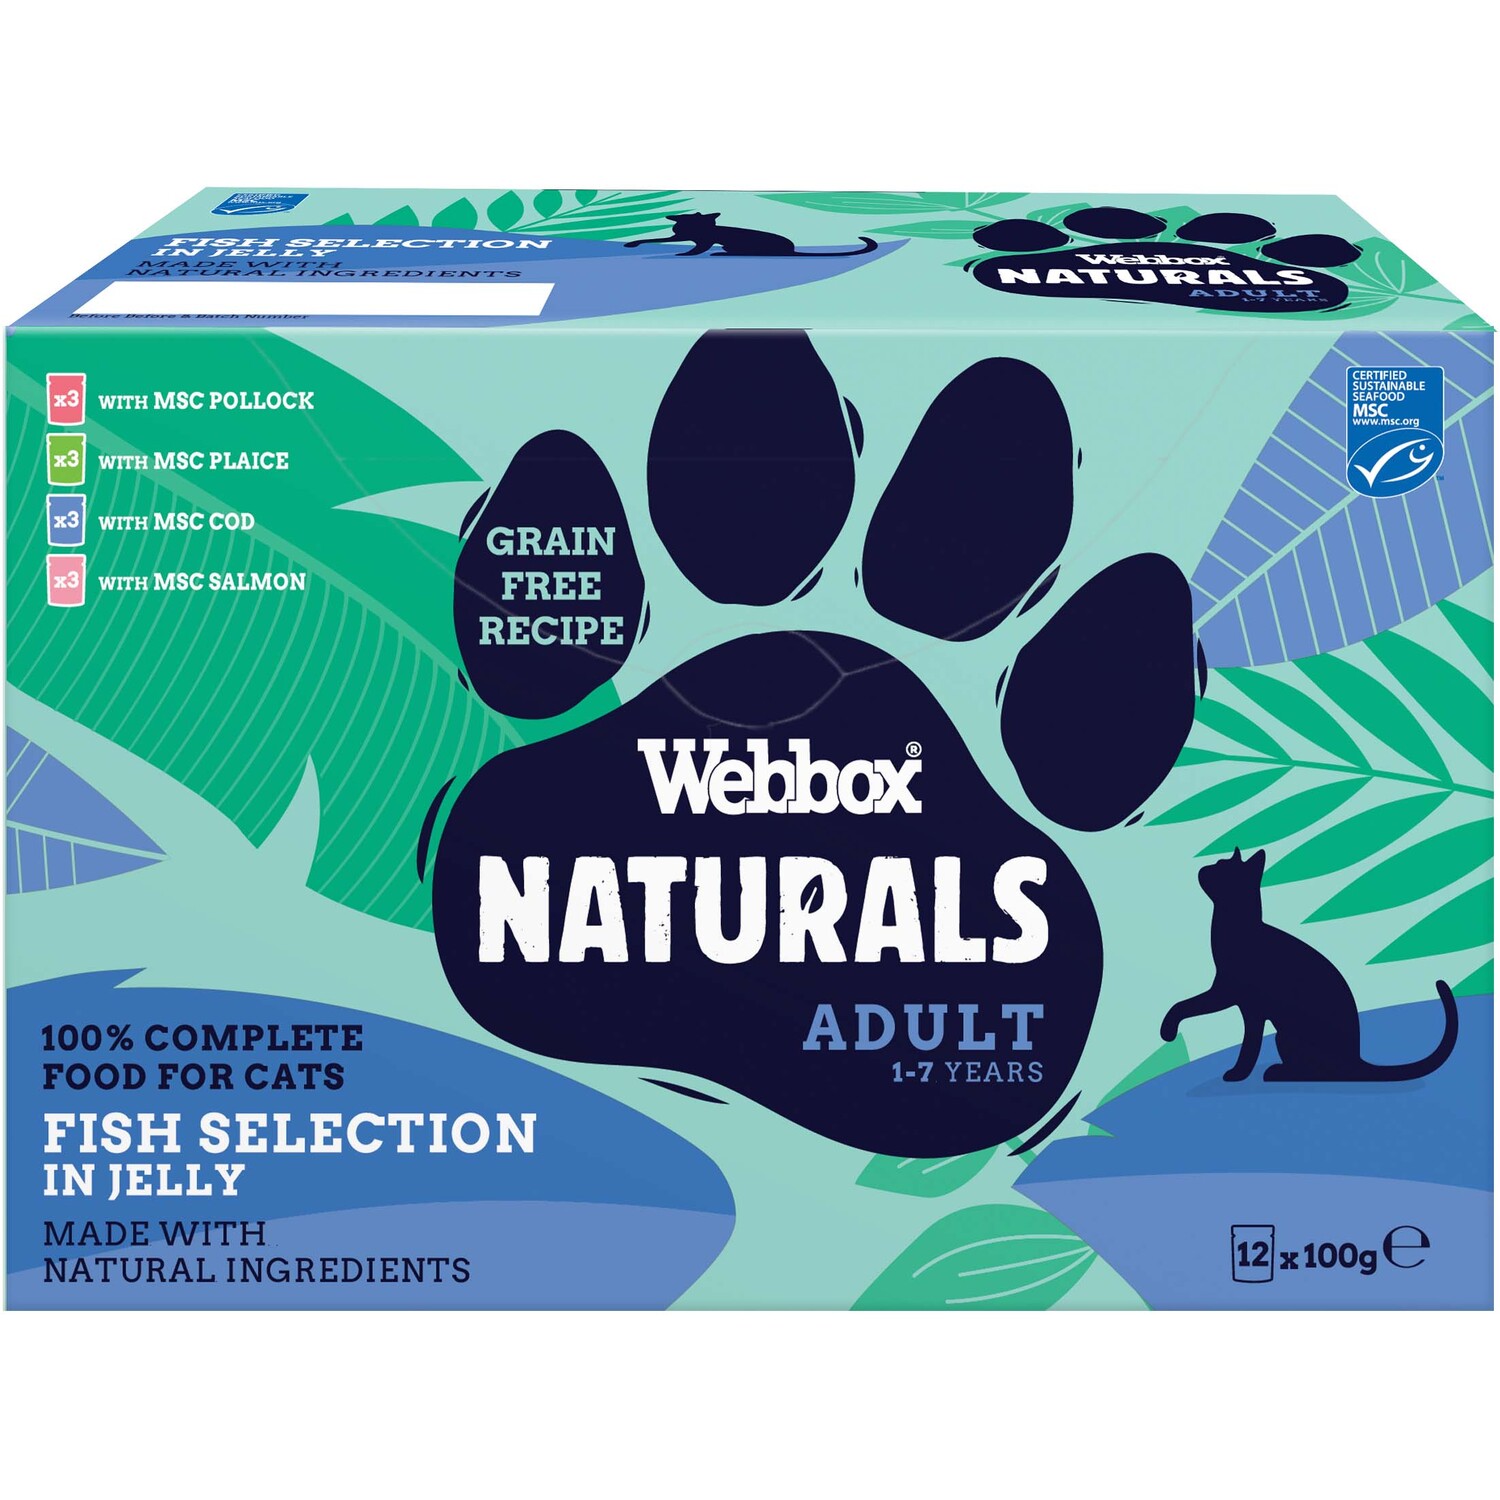 Webbox Naturals Grain Free Fish Selection in Jelly Adult Cat Food 12 Pack Image